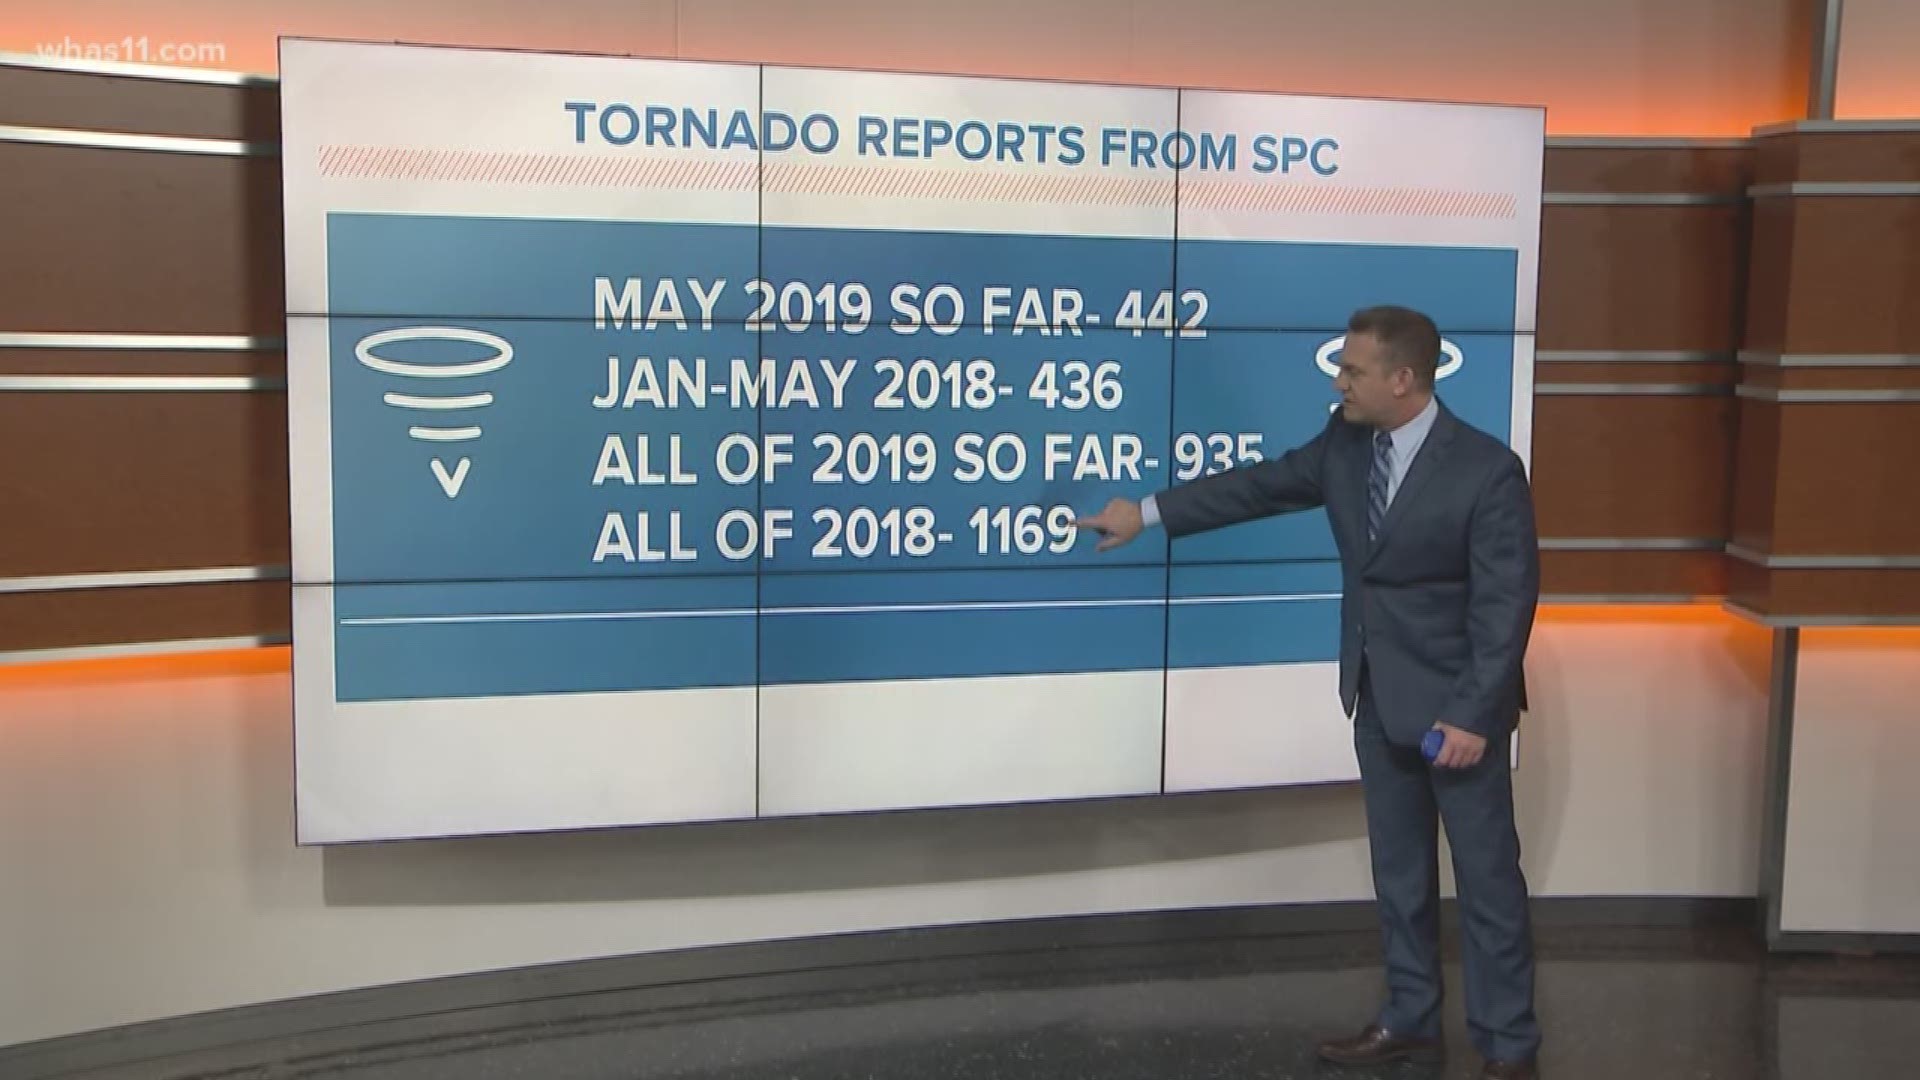 For the month of May 2019 there have been 442 tornado reports. WHAS11's T.G. Shuck talks more.